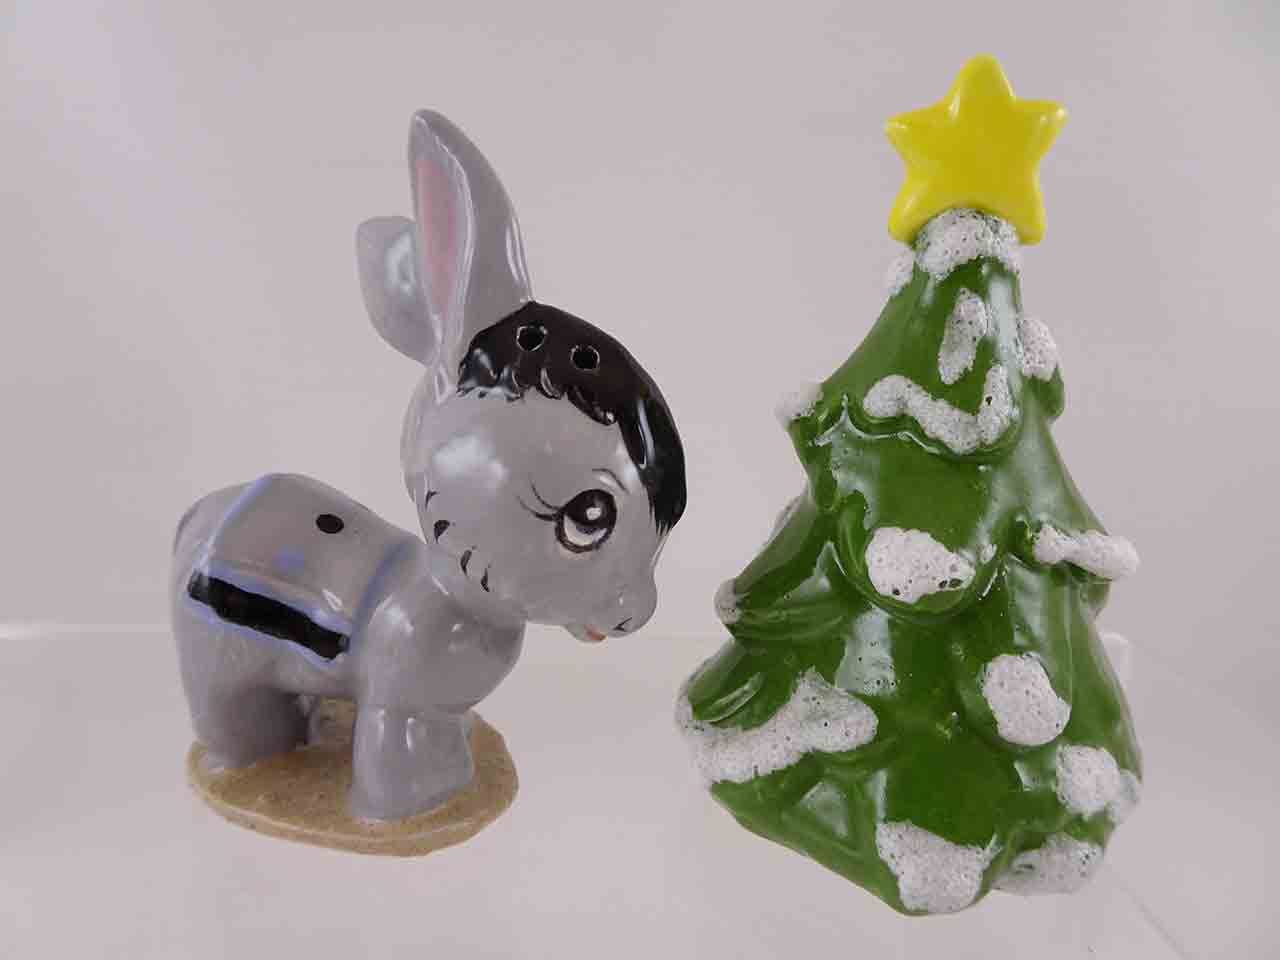 Jean Grief nativity scene series of salt and pepper shakers - donkey & tree